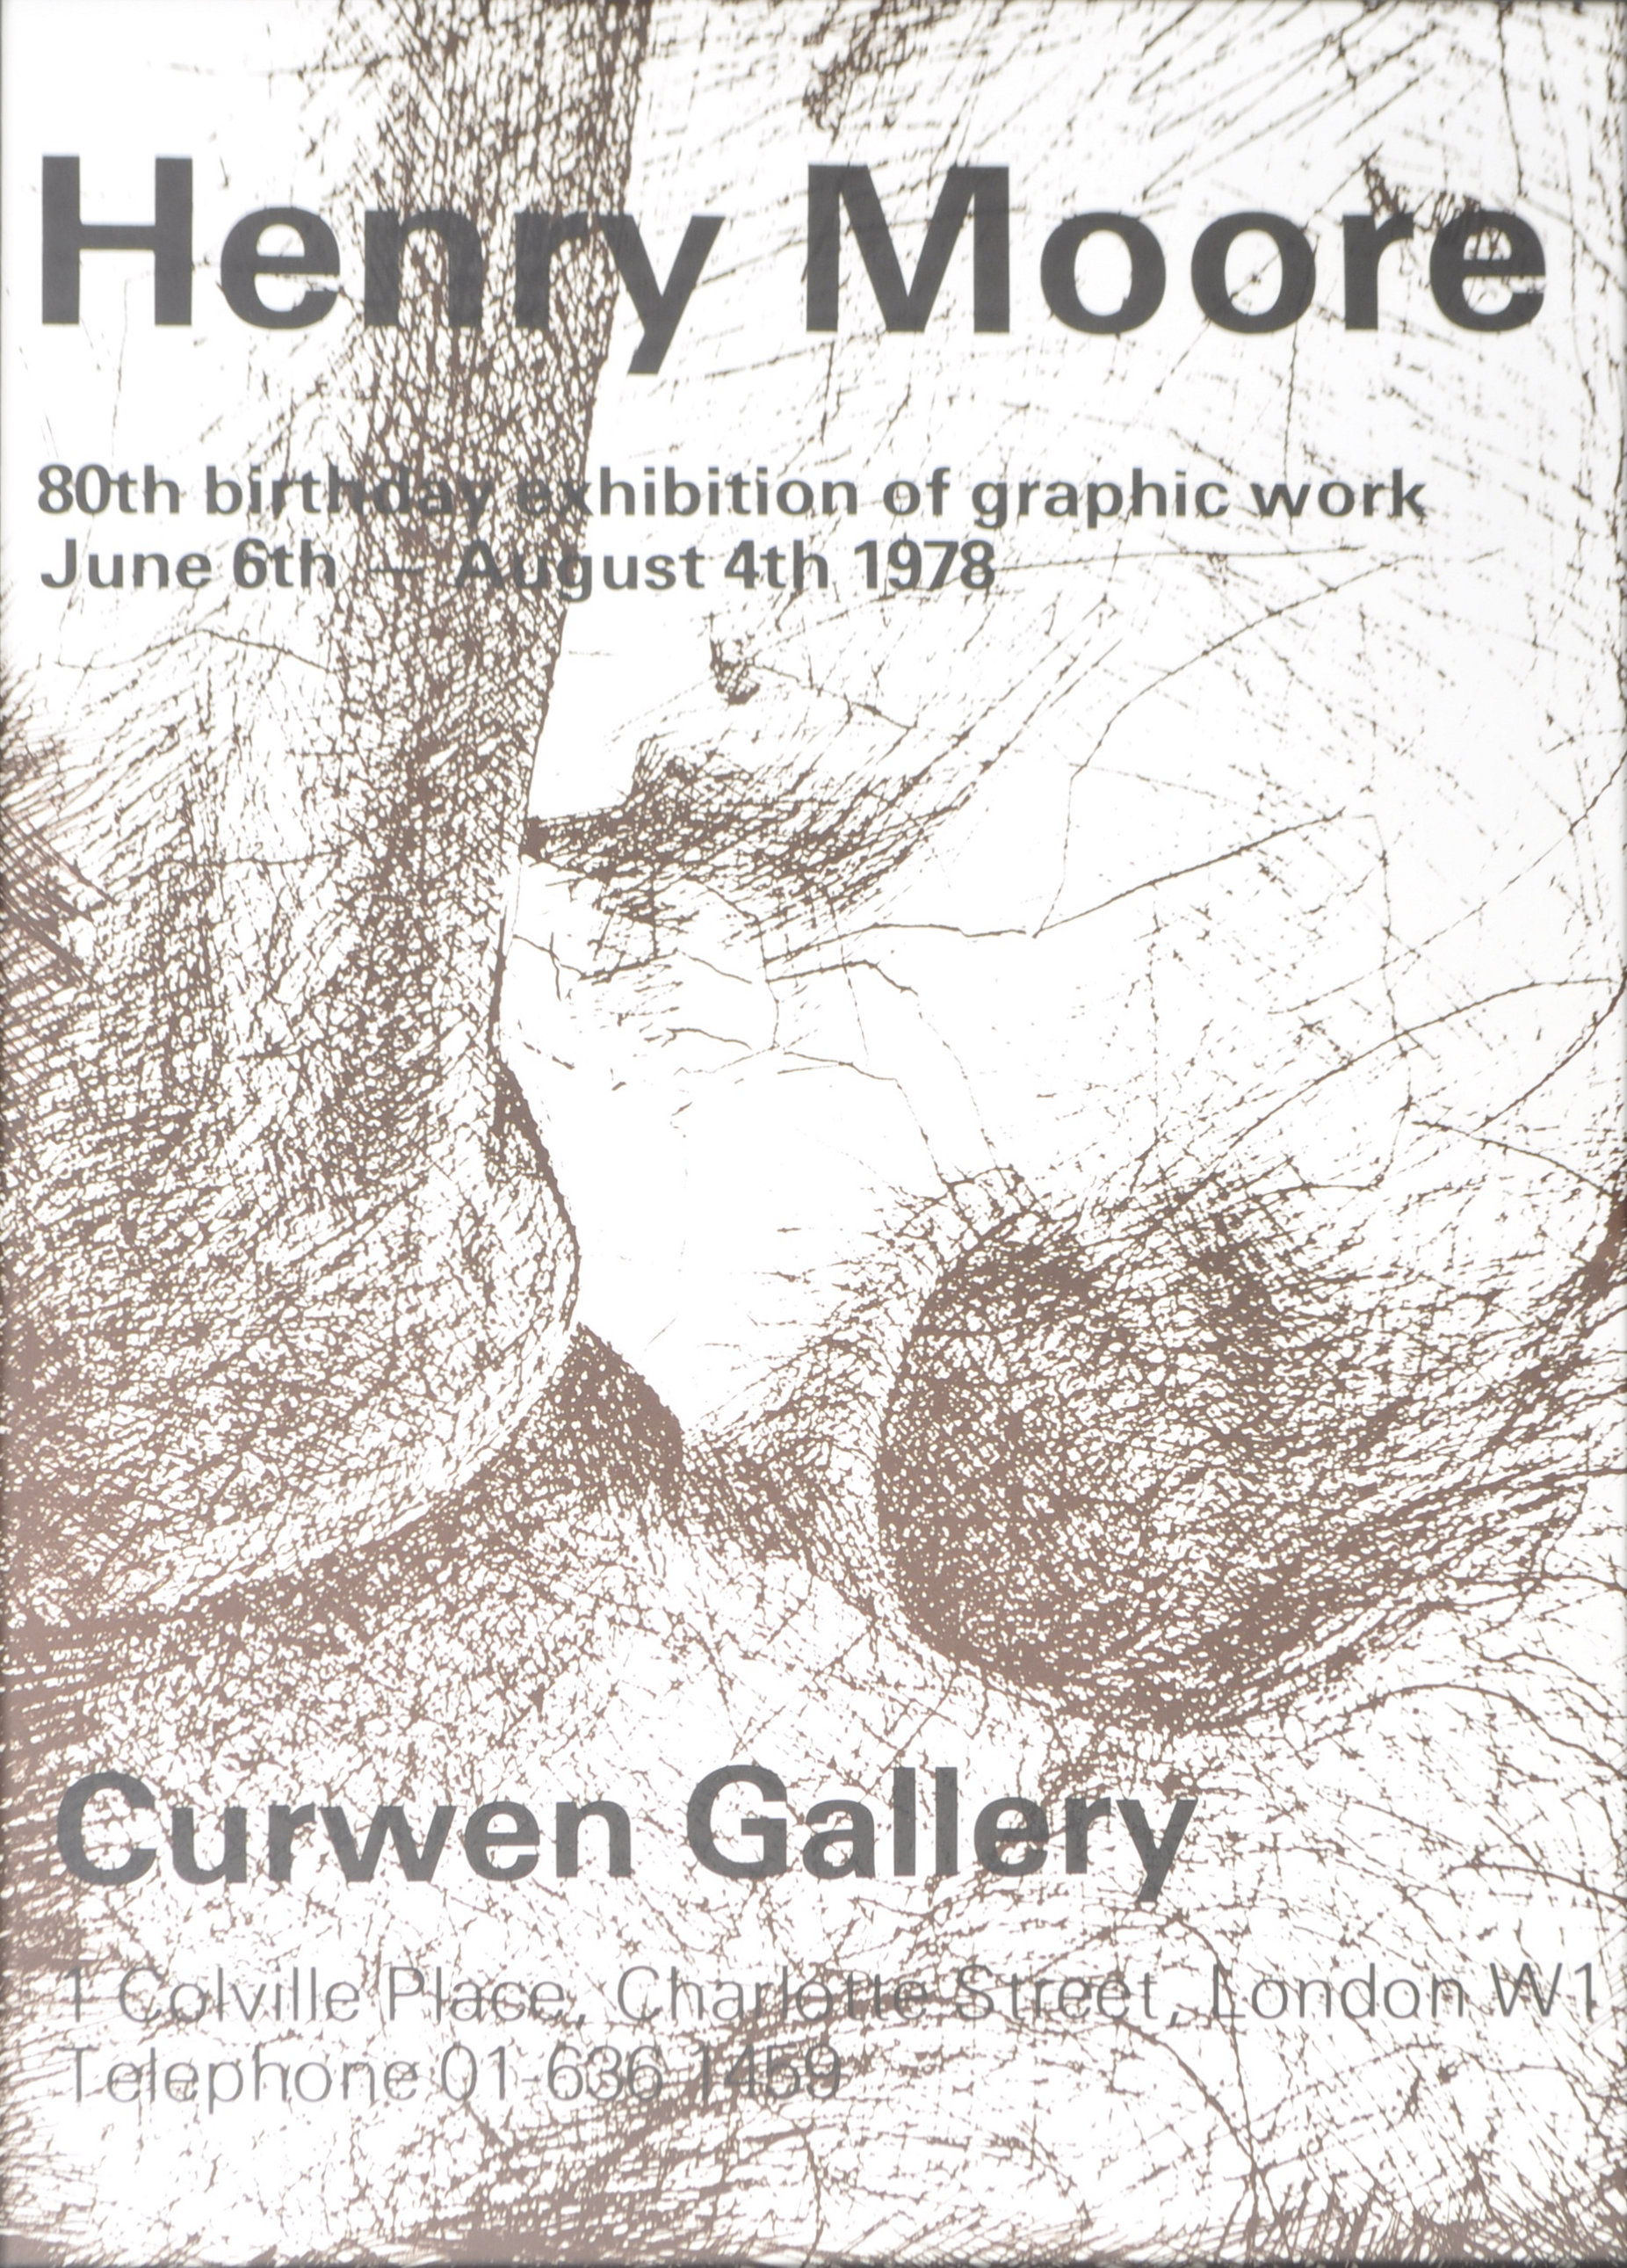 1970s GALLERY EXHIBITION POSTER FOR HENRY MOORE